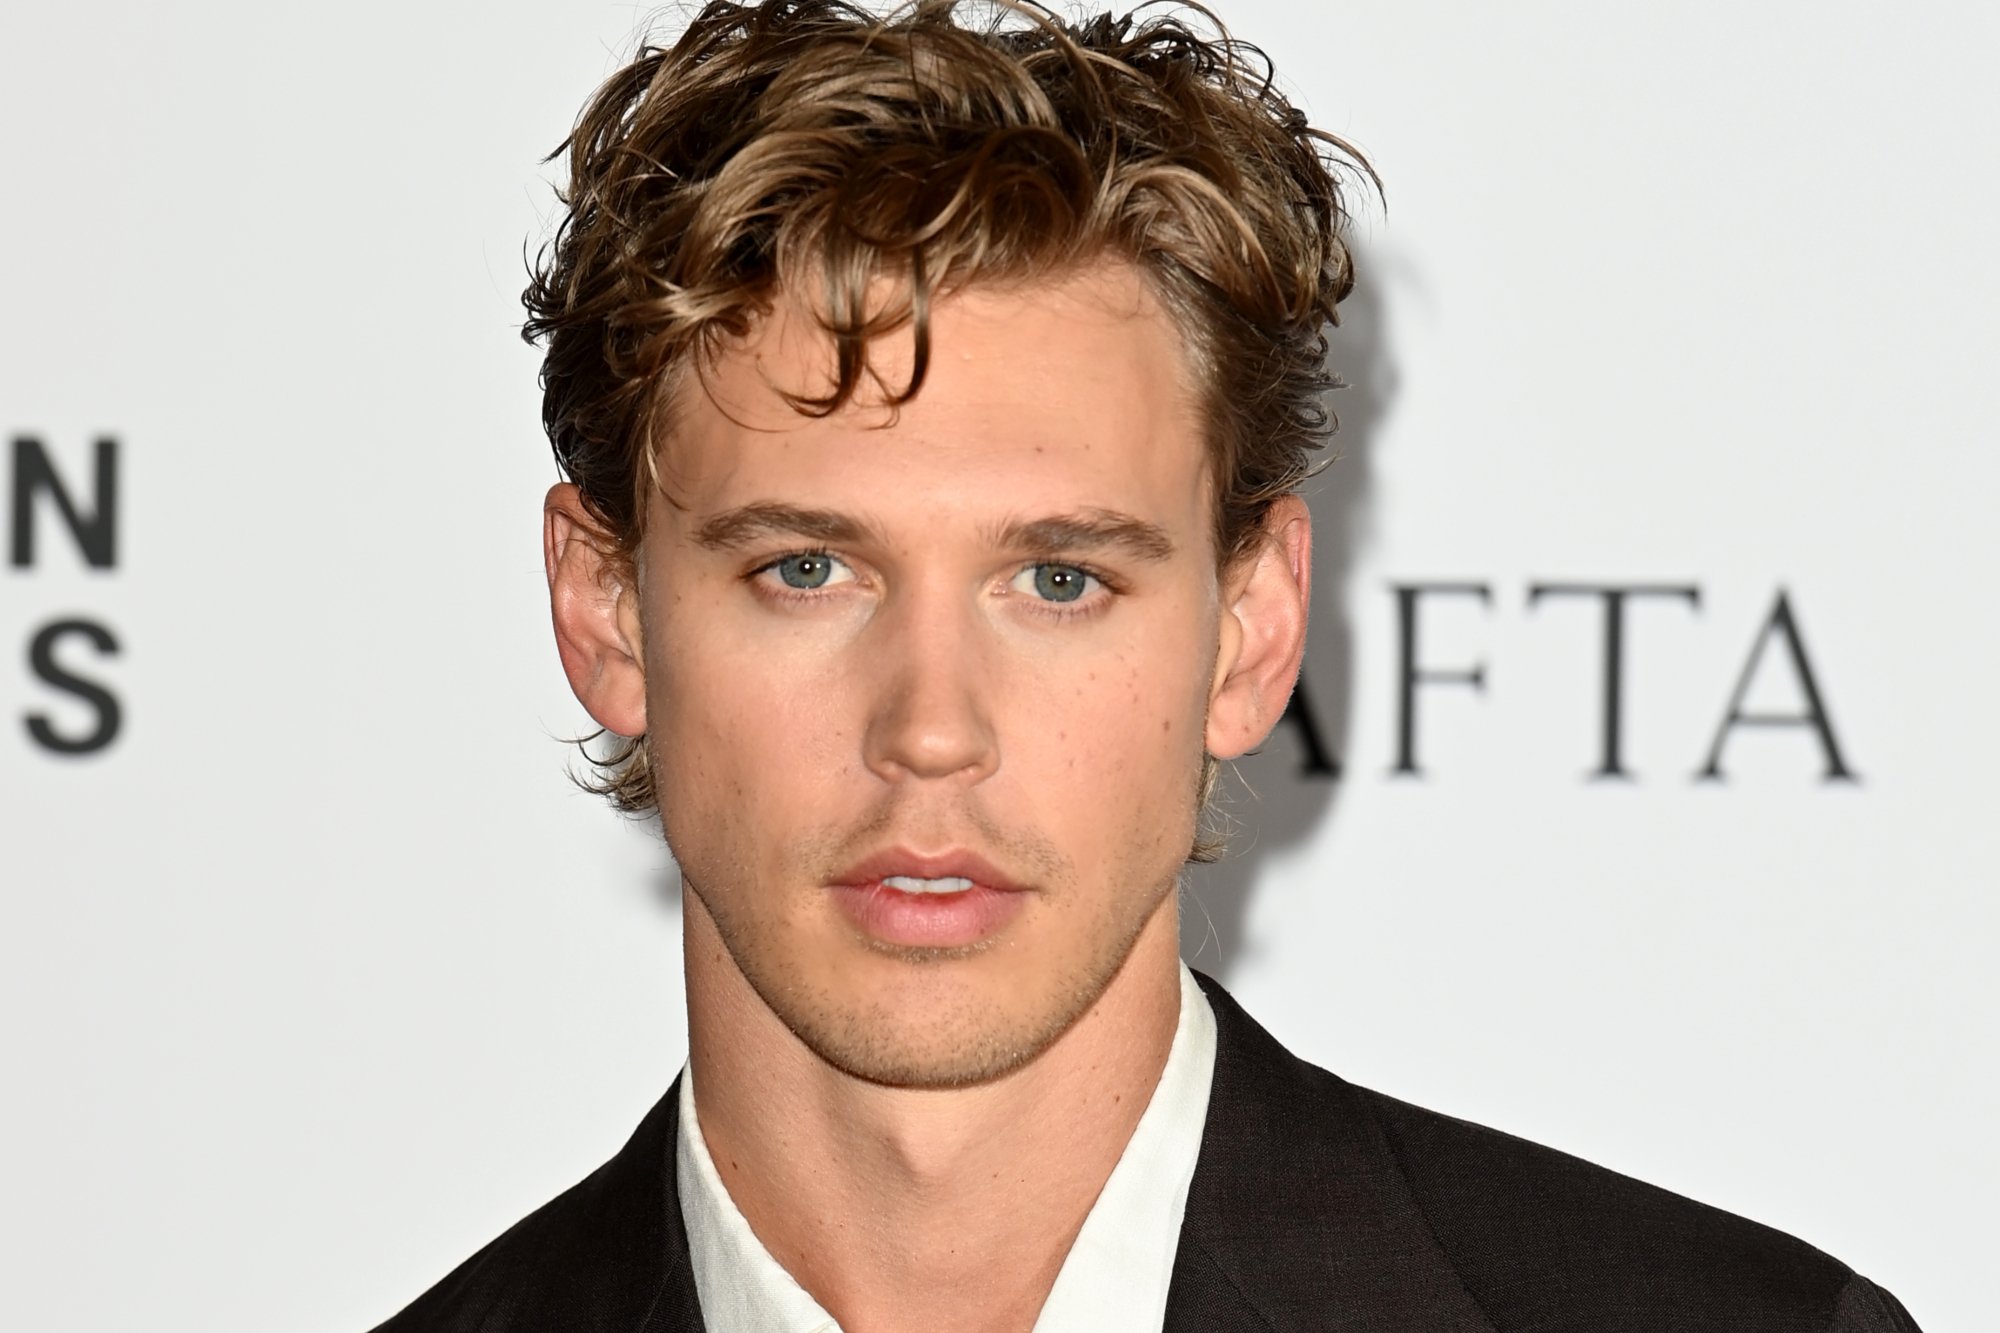 'Elvis' actor Austin Butler posing in front of a white step and repeat